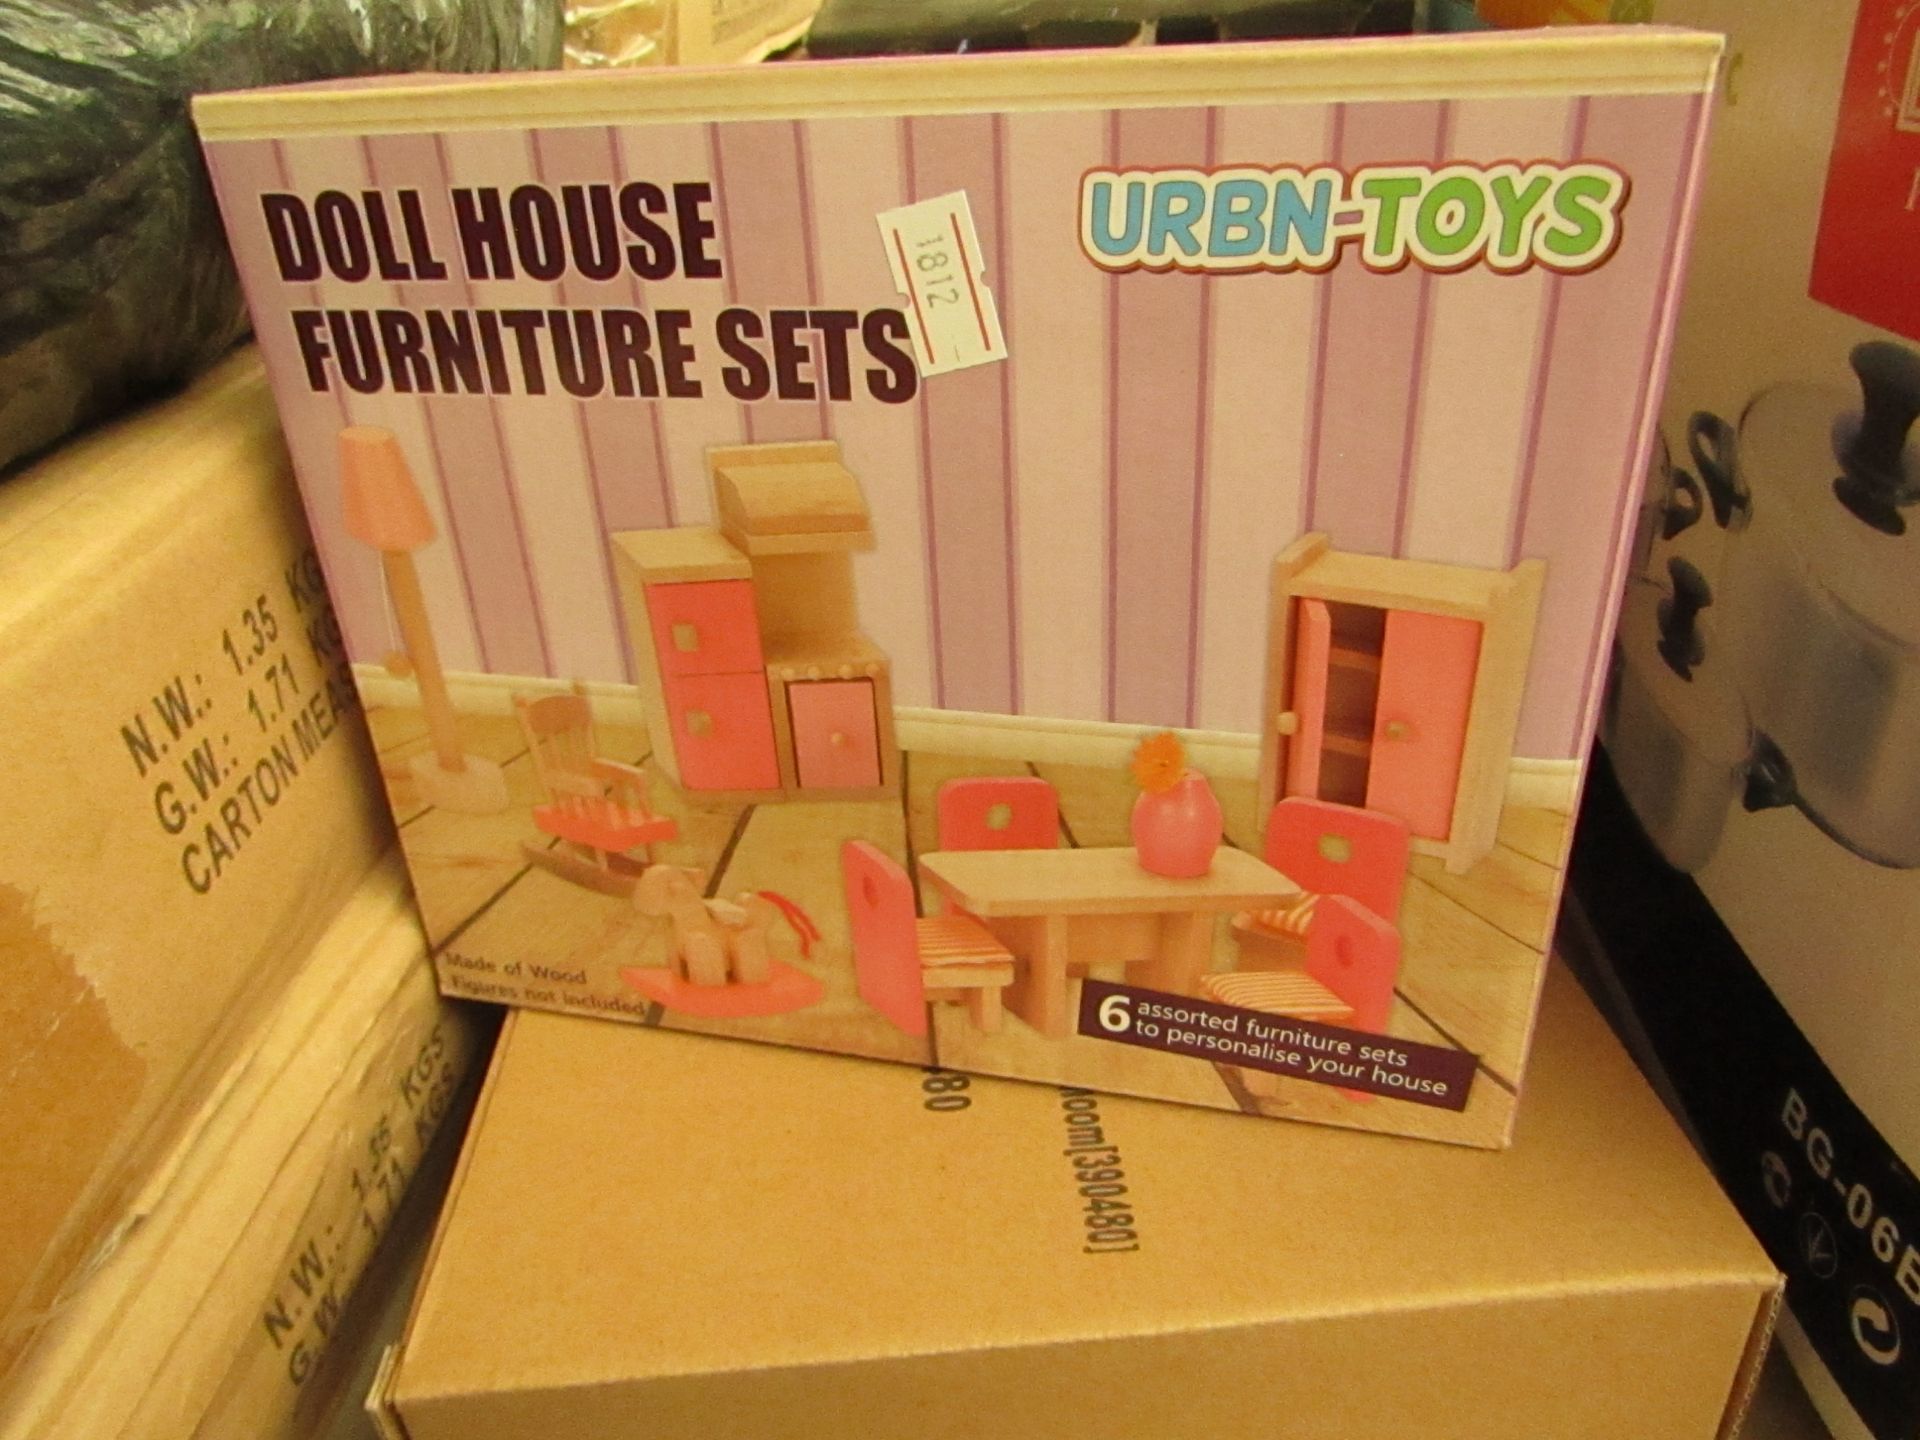 1 x Urban Toys Doll House Furniture Set. new & packaged